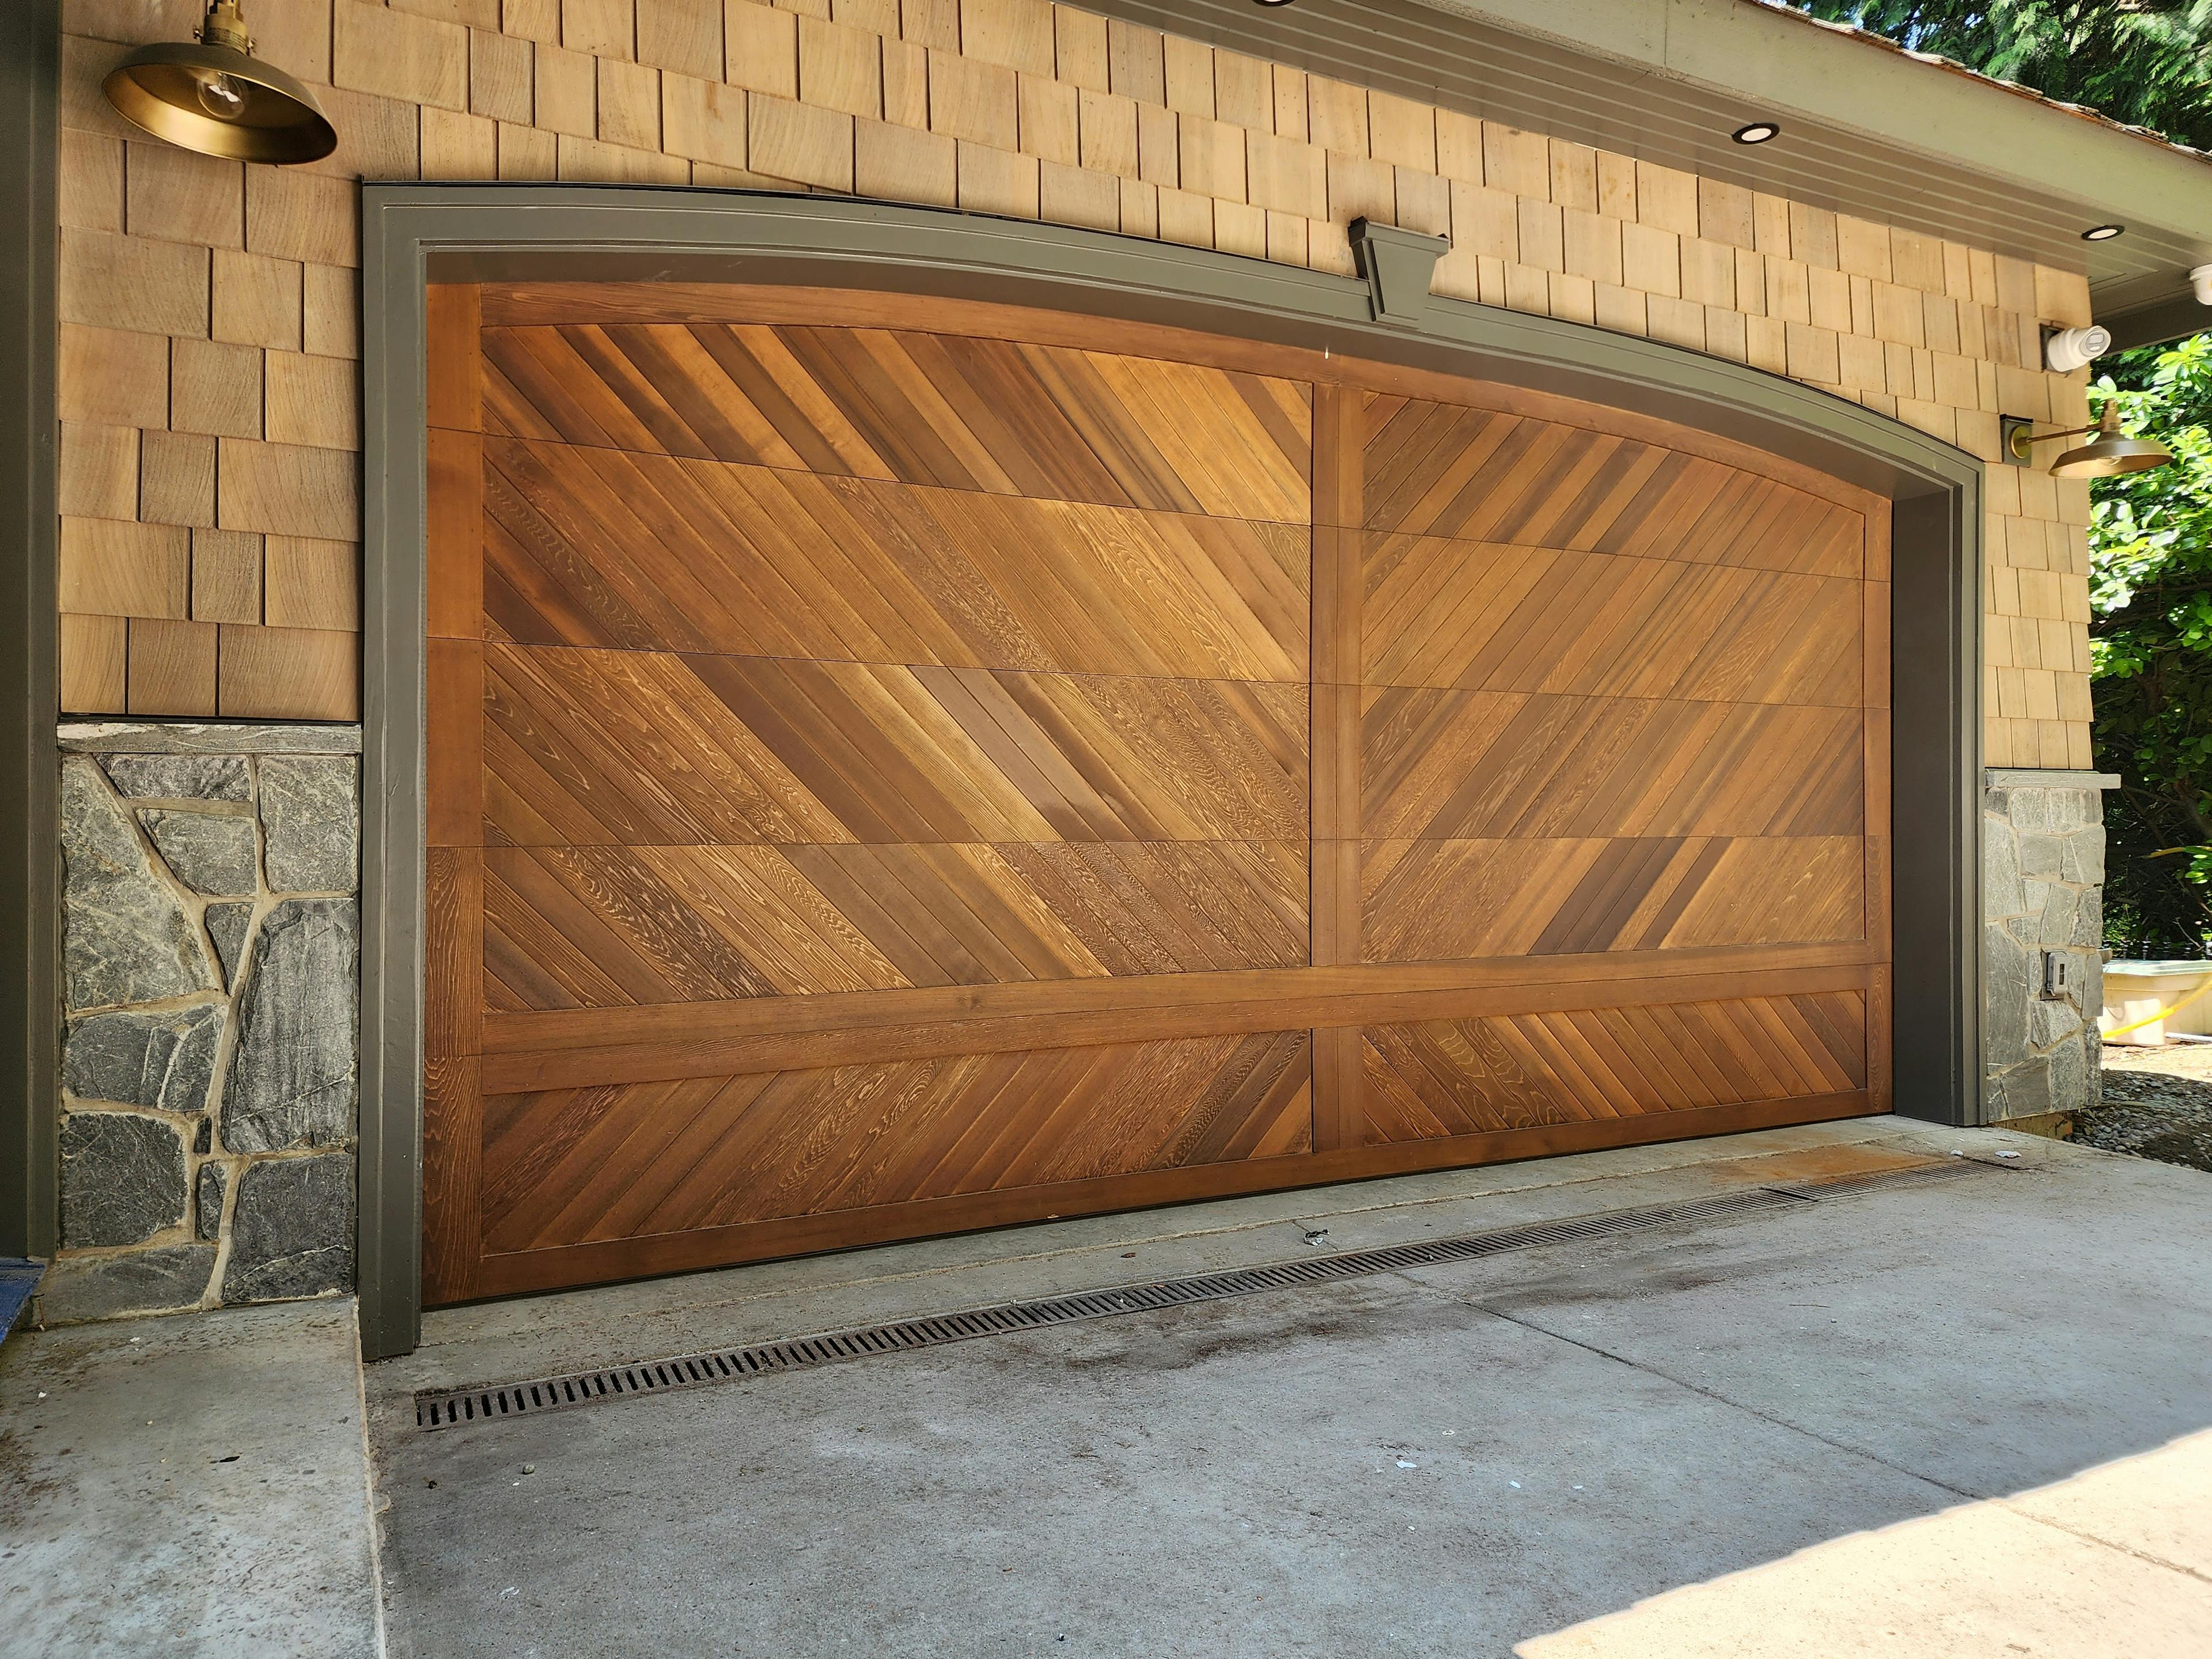 a 16'x8' Amarr Heritage steel door. It's a 25-gauge fully insulated door, 2" thick, with 3" commercial-grade hardware. We added a 2" thick custom Cedar Wood Overlay on the door's face to enhance its durability and design